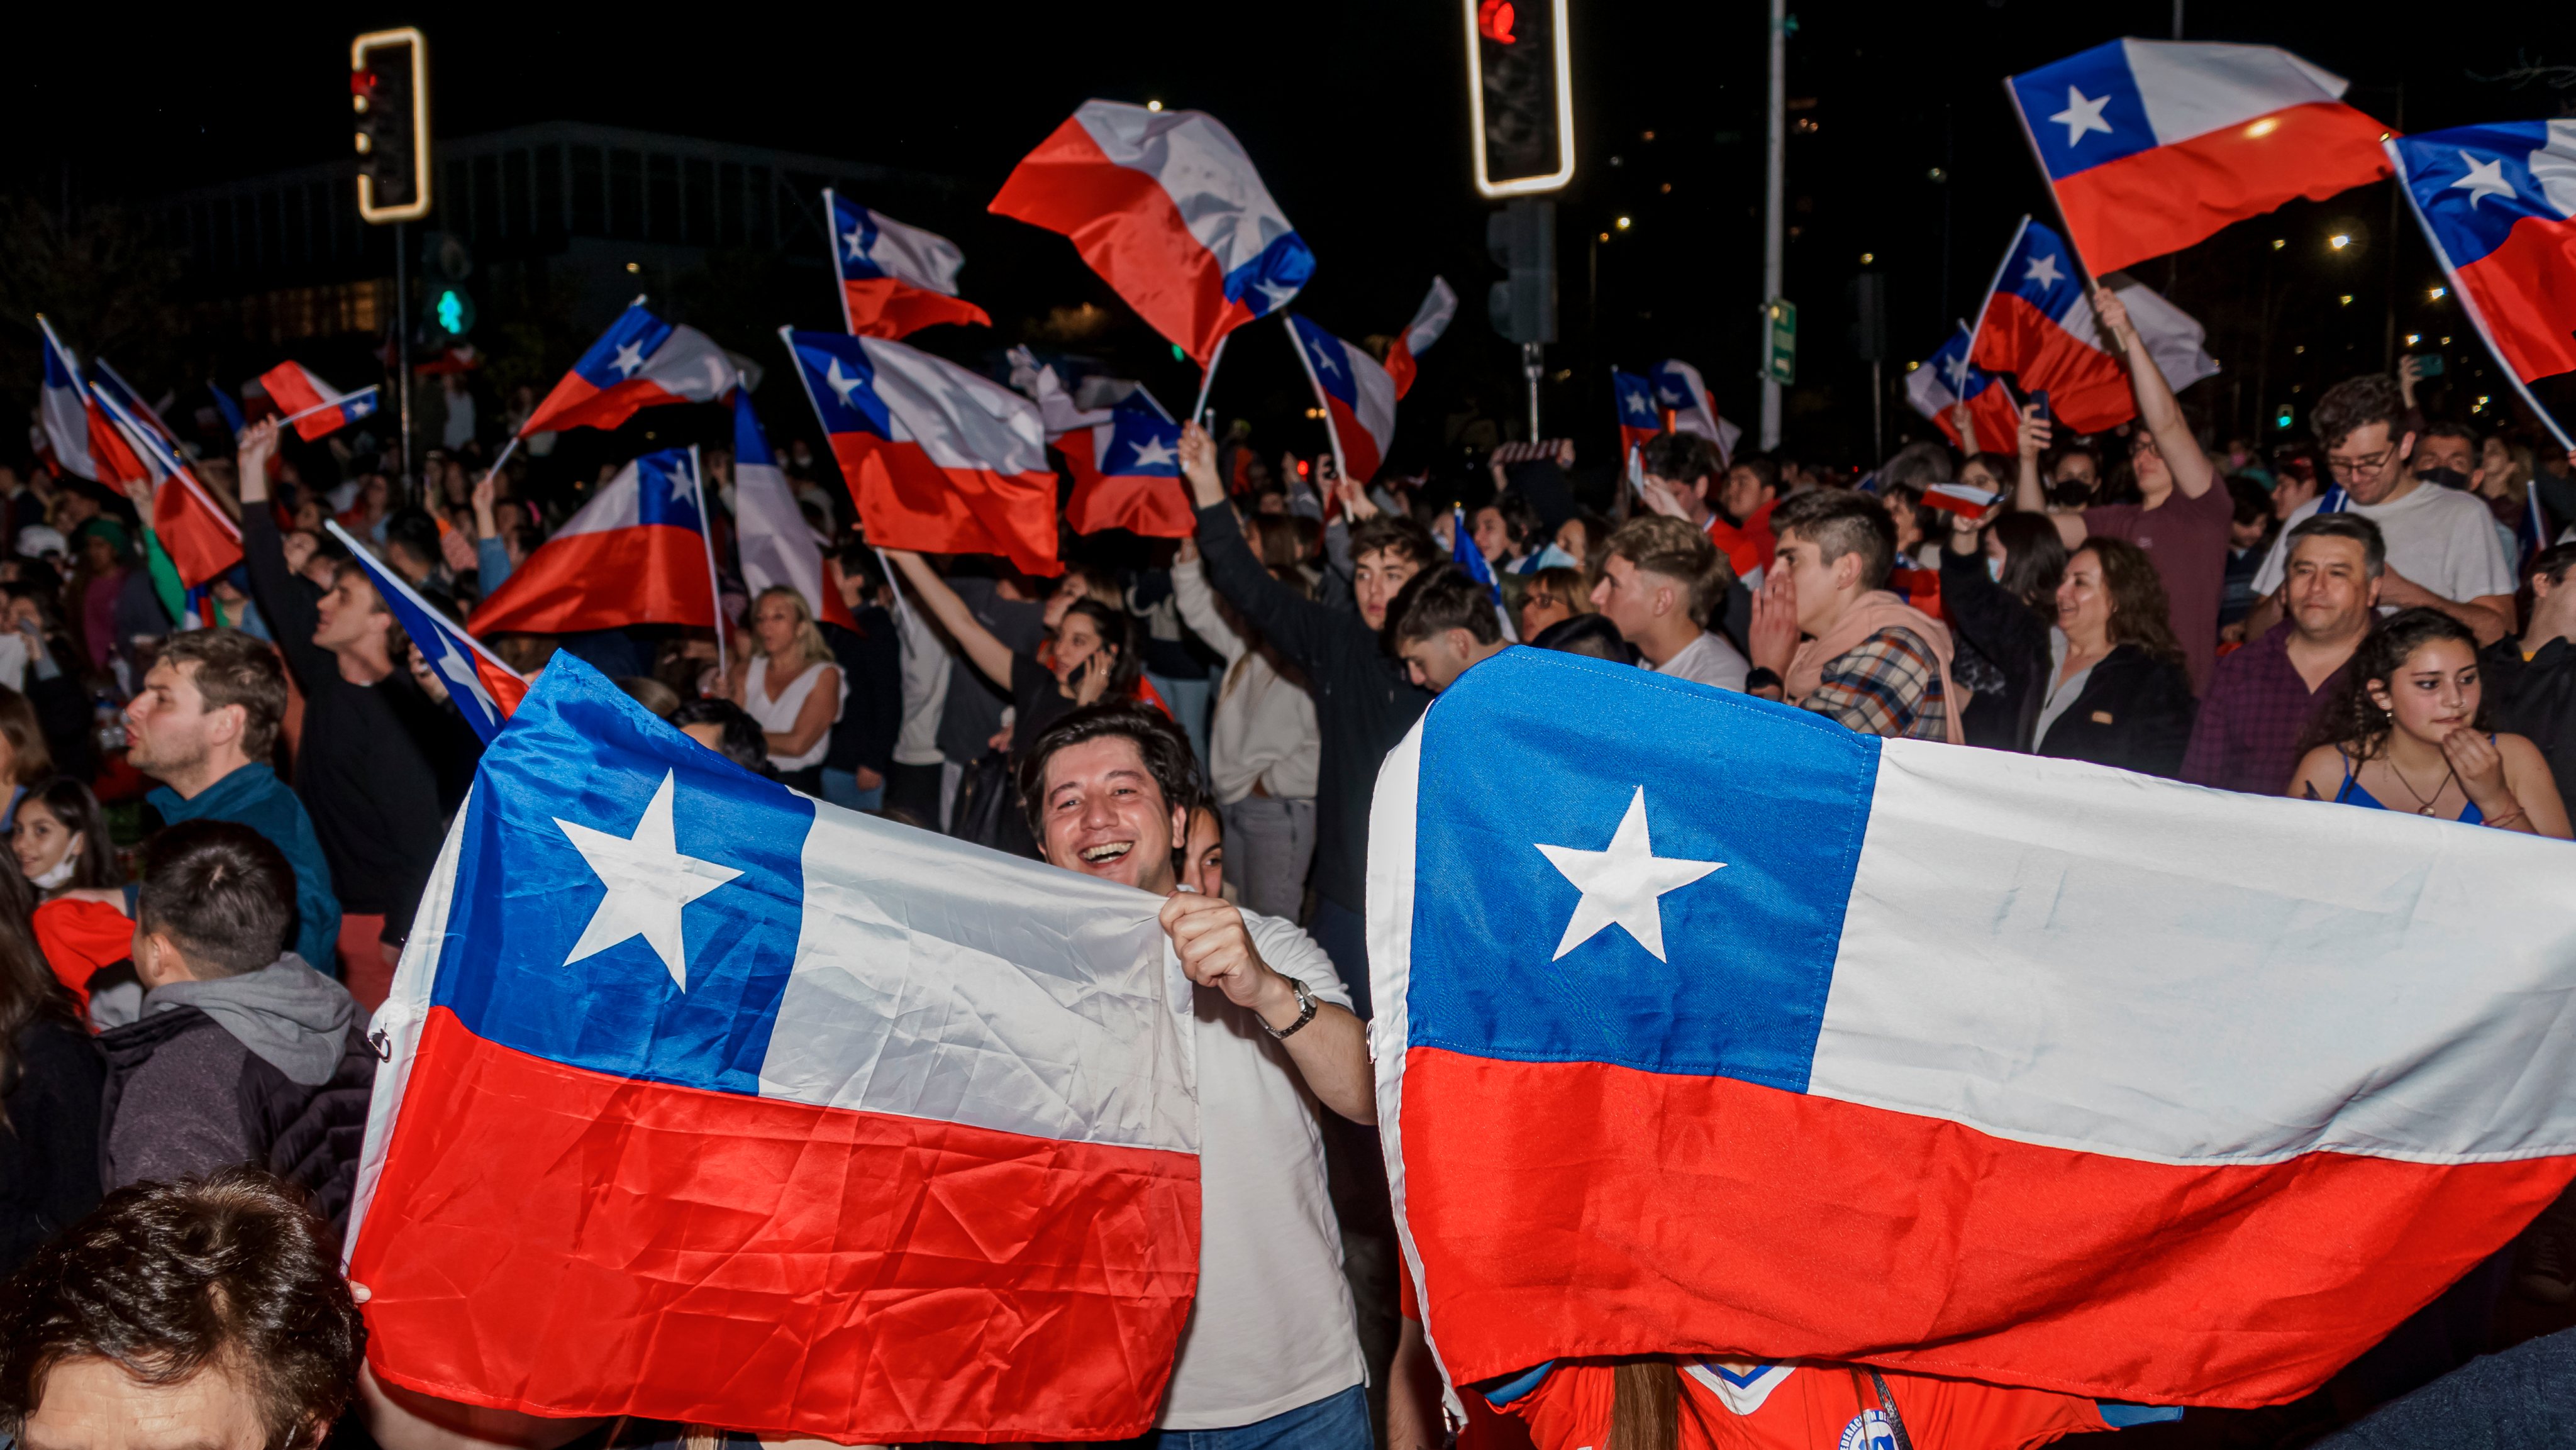 Chileans Vote To Approve Or Reject New Constitution Draft